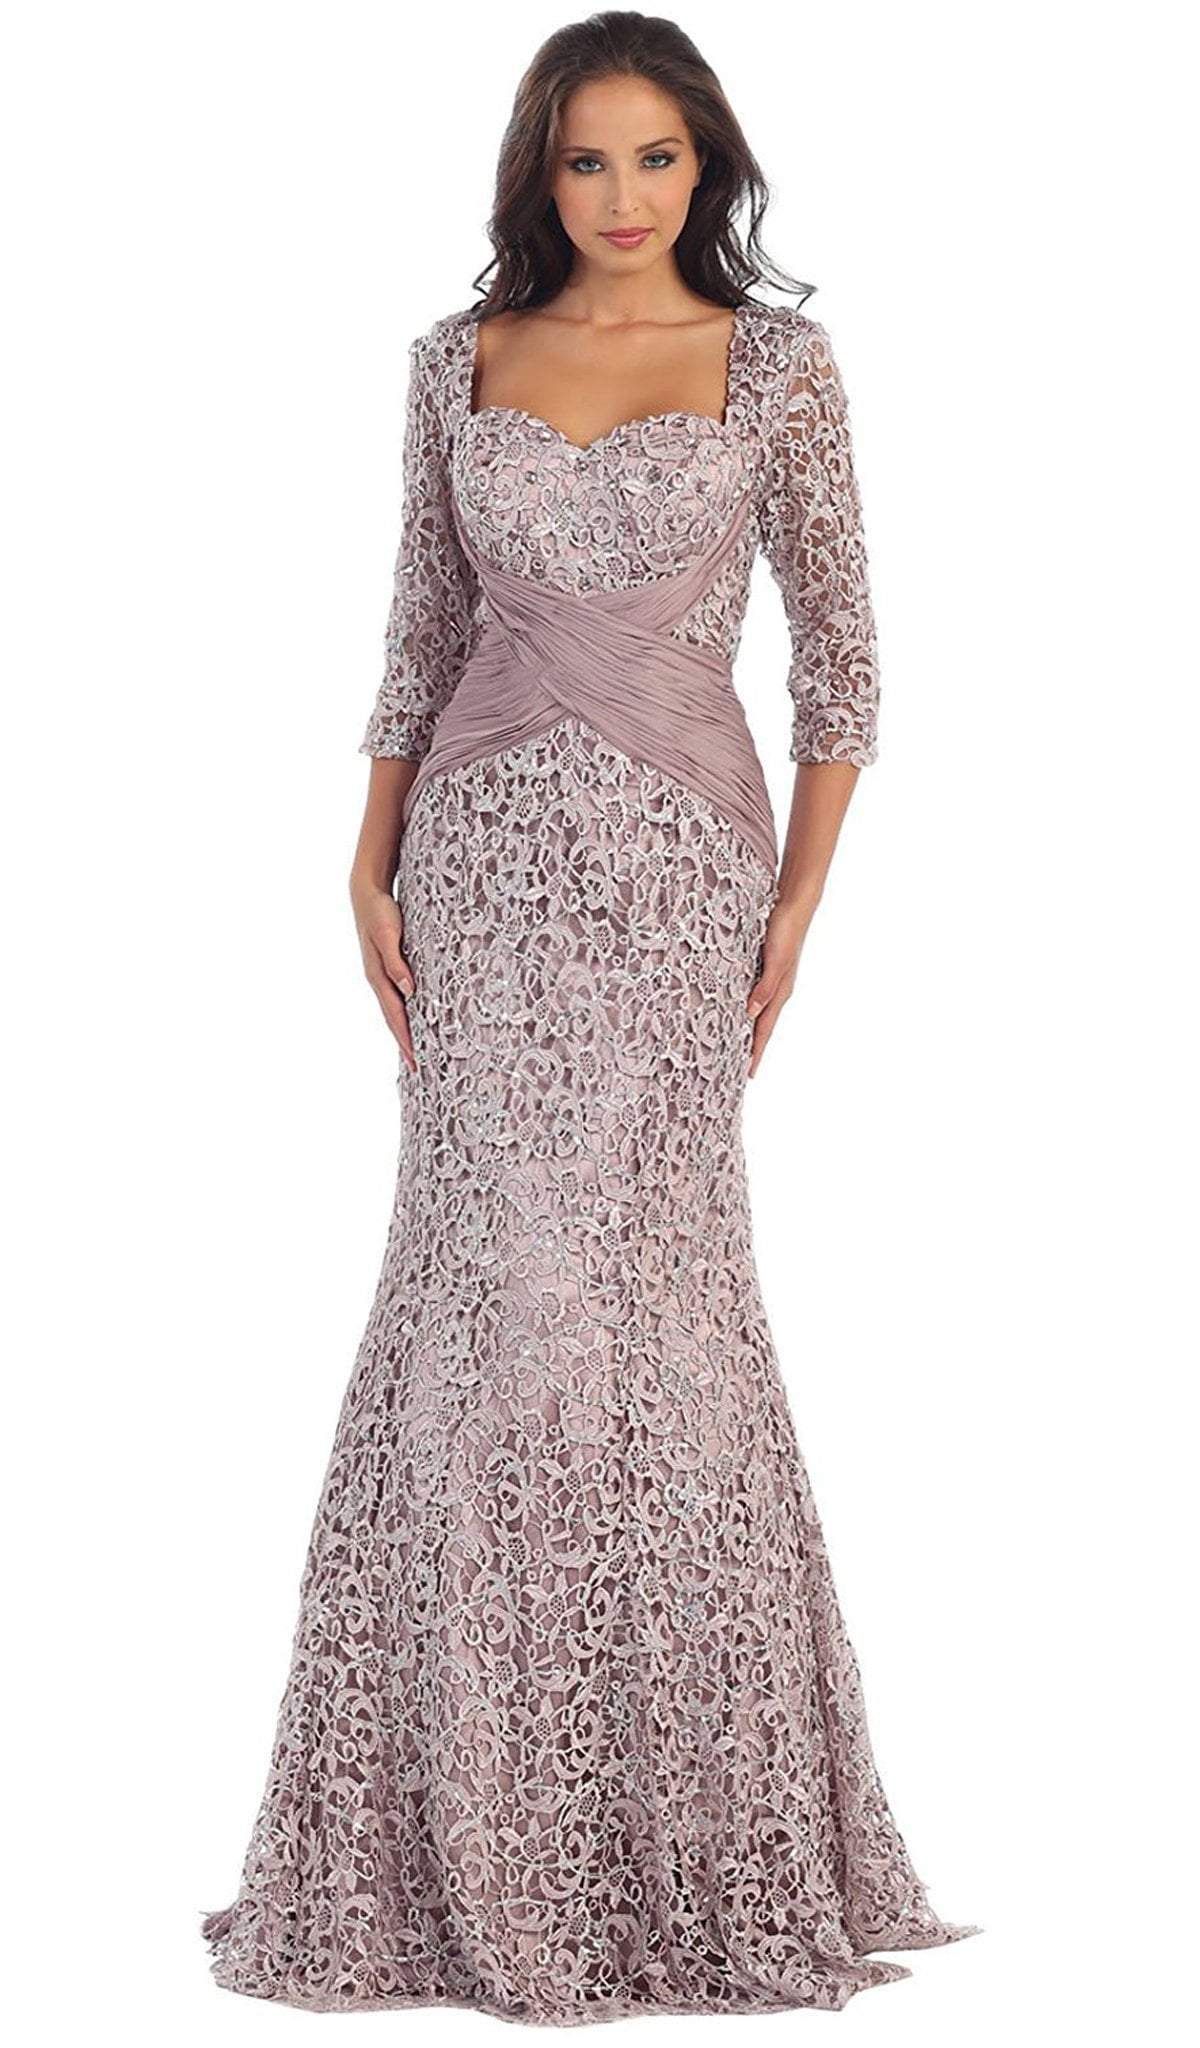 May Queen - Lace Crisscrossed Shirring Mermaid Evening Gown Evening Dresses M / Mauve